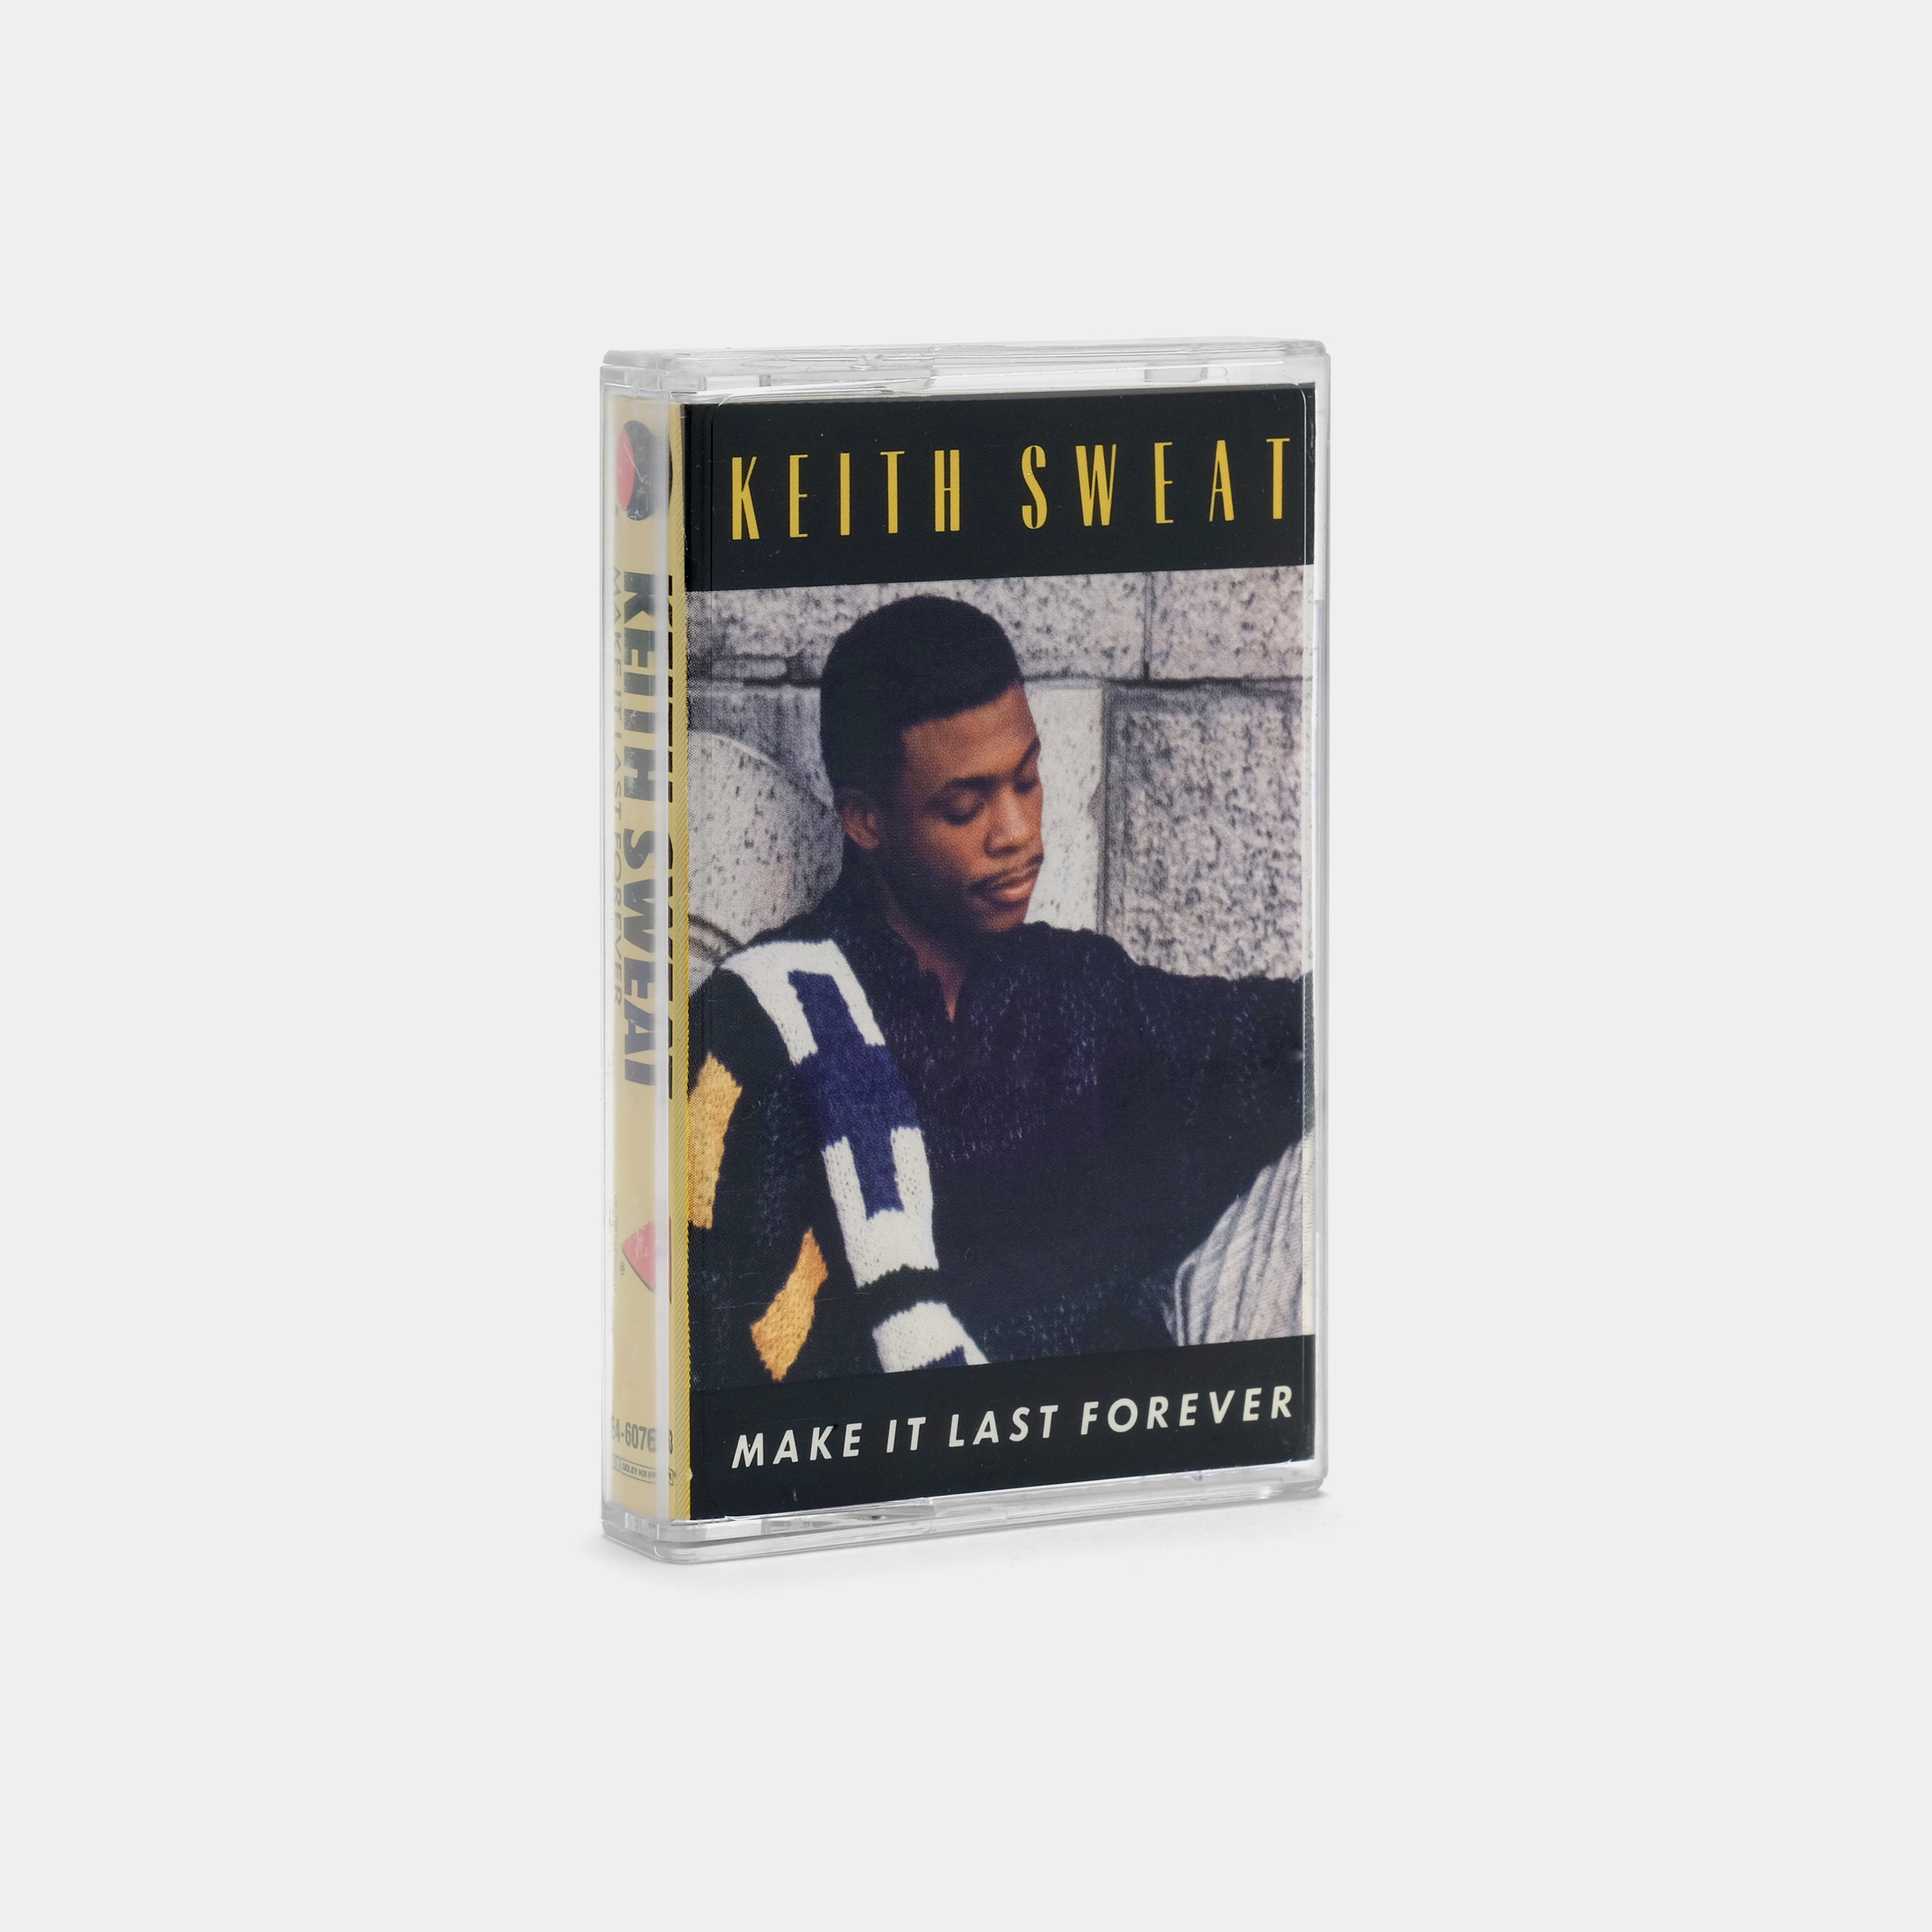 Keith Sweat - Make It Last Forever Cassette Tape